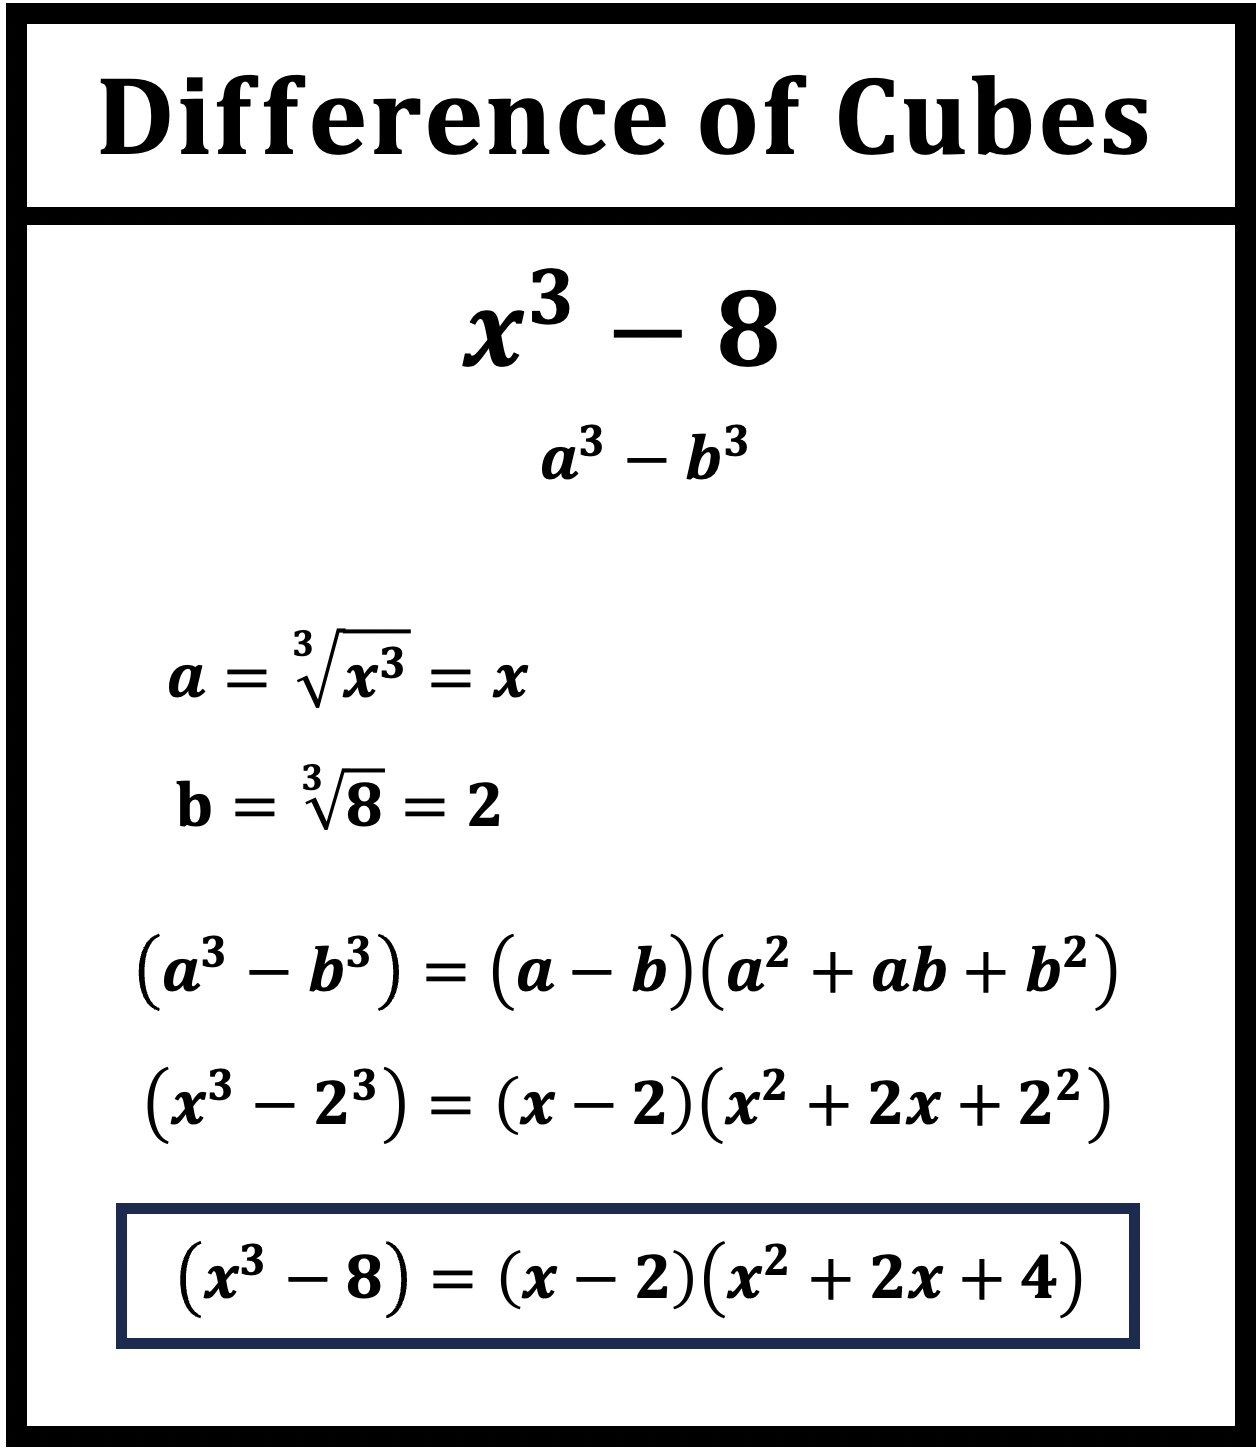 Difference of Cubes Example